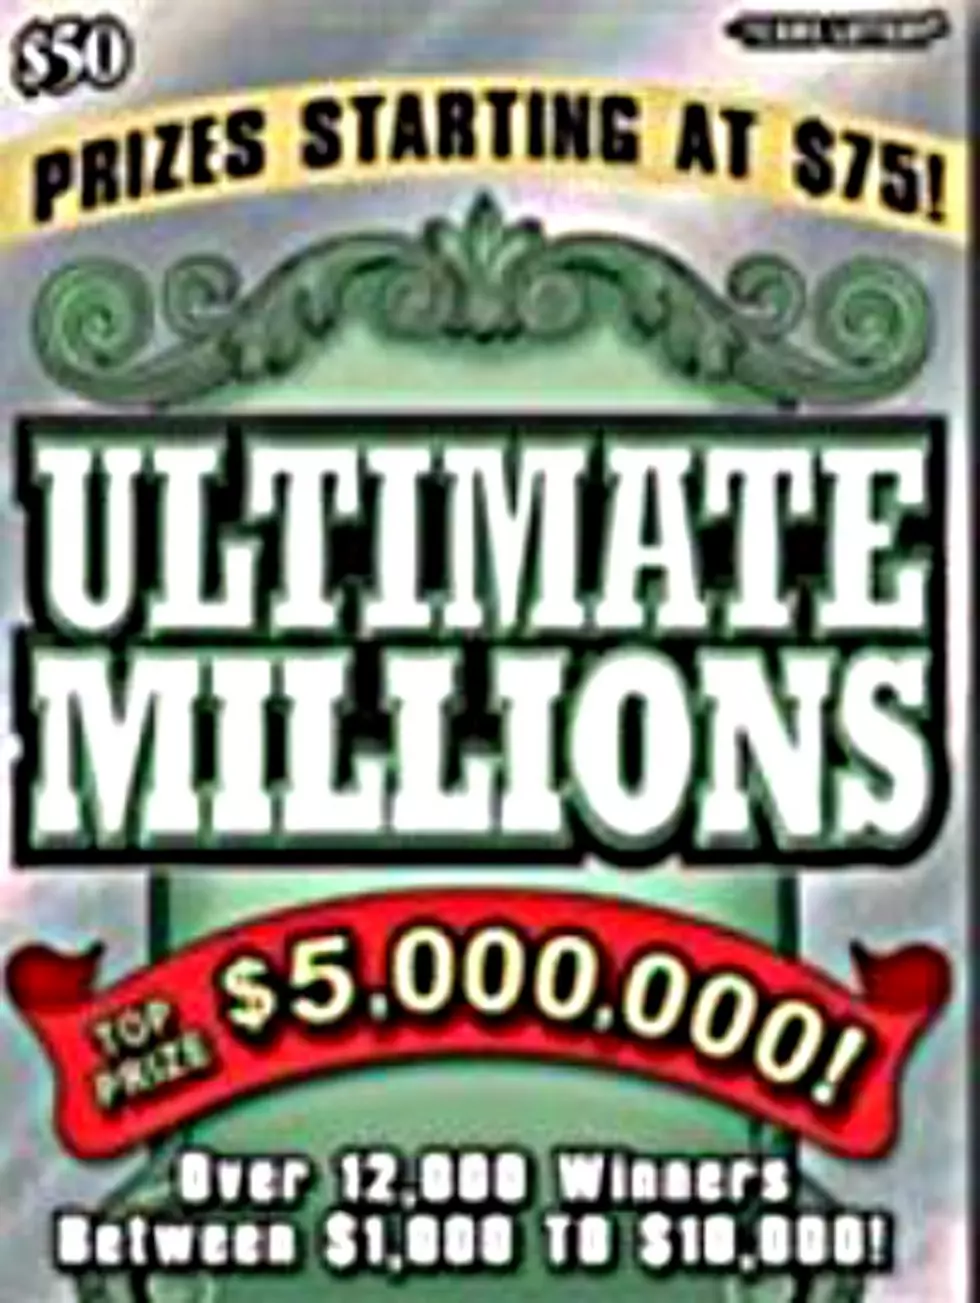 $5 Million Dollar Prize Claimed by Someone From San Antonio